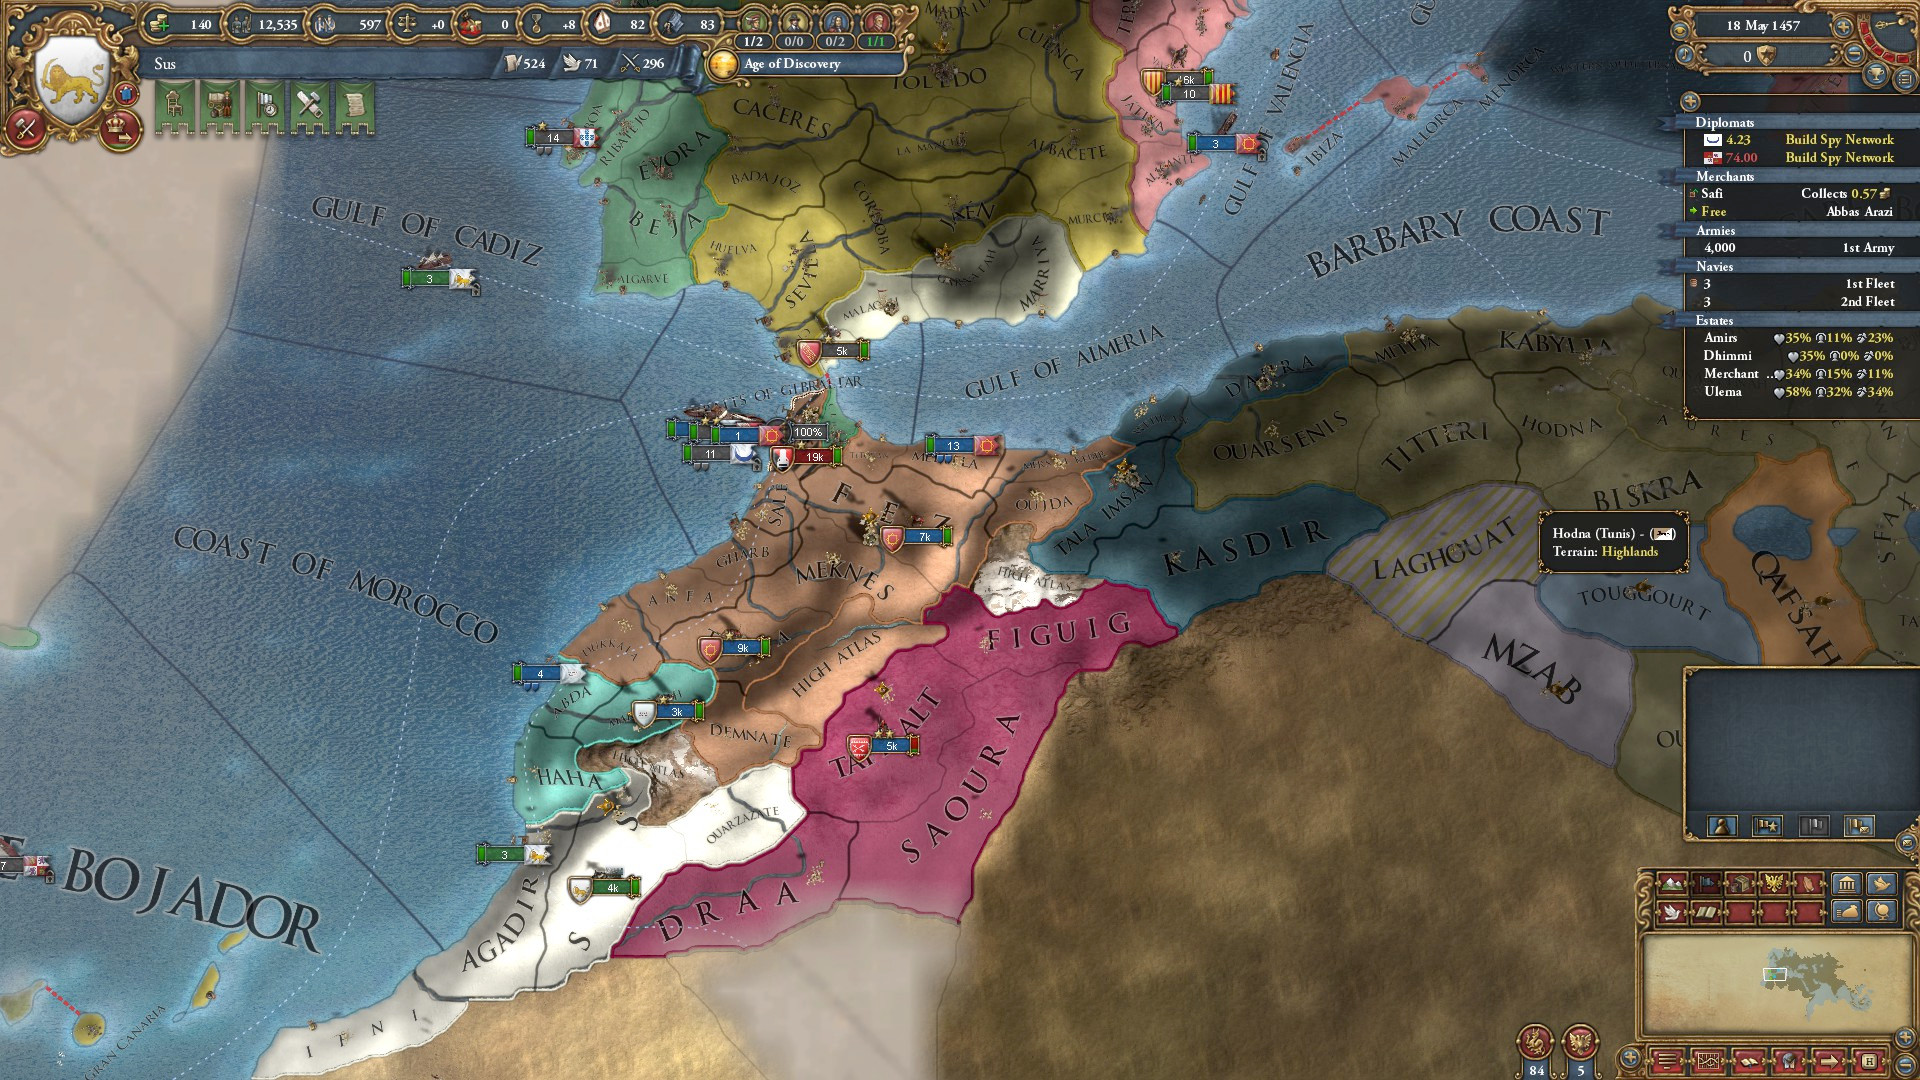 The best Europa Universalis 4 achievements - EU4 screenshot showing an in game map of north africa and iberia